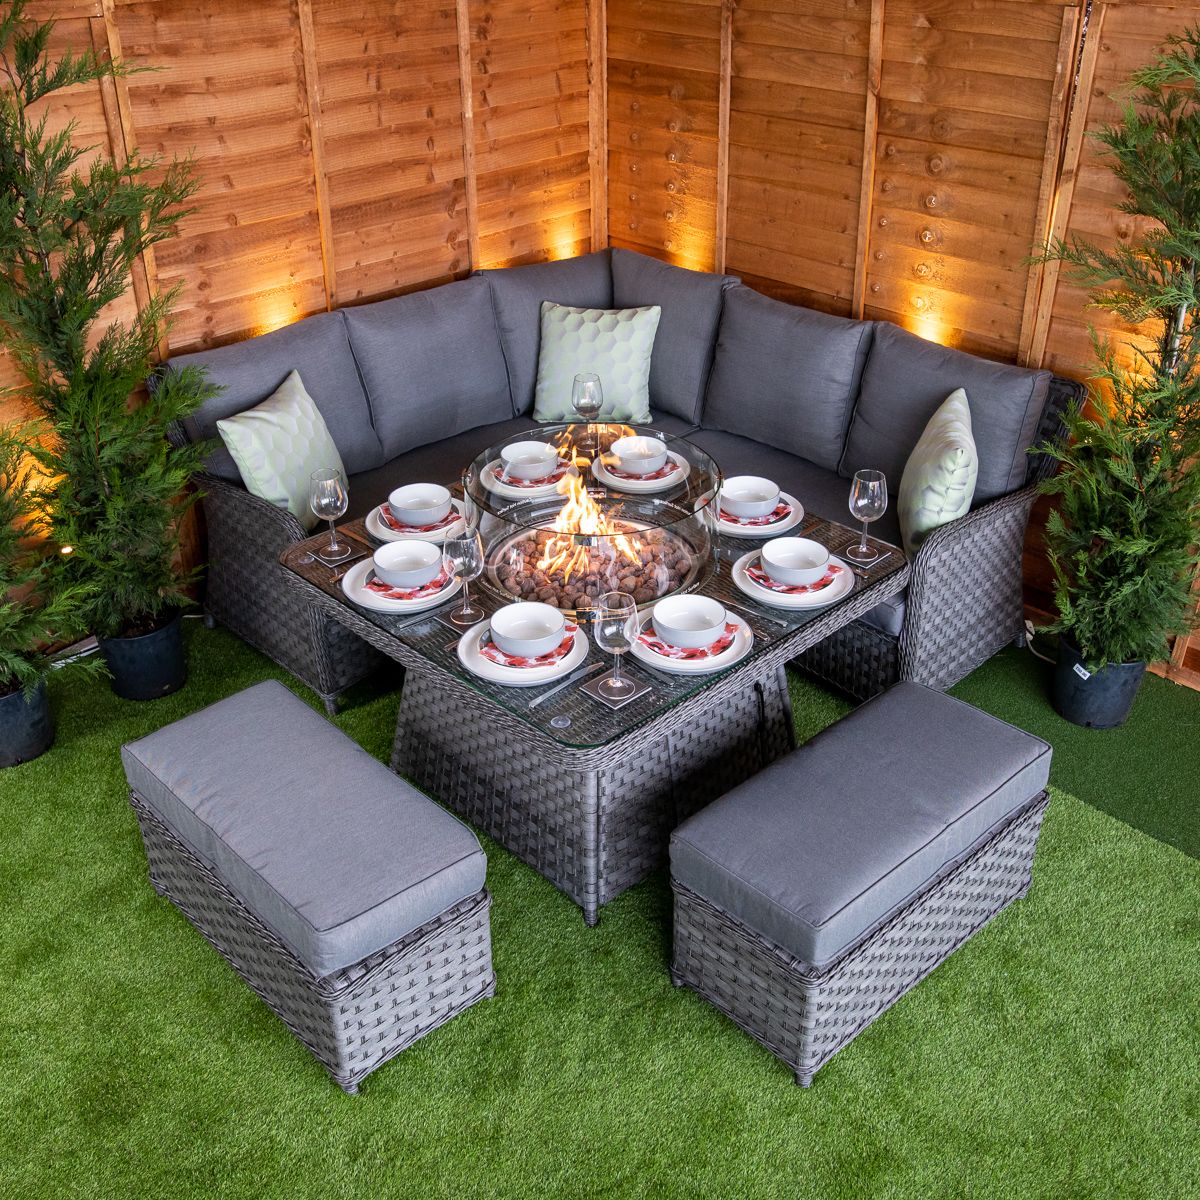 Embrace Summer Vibes with Rattan Garden Furniture